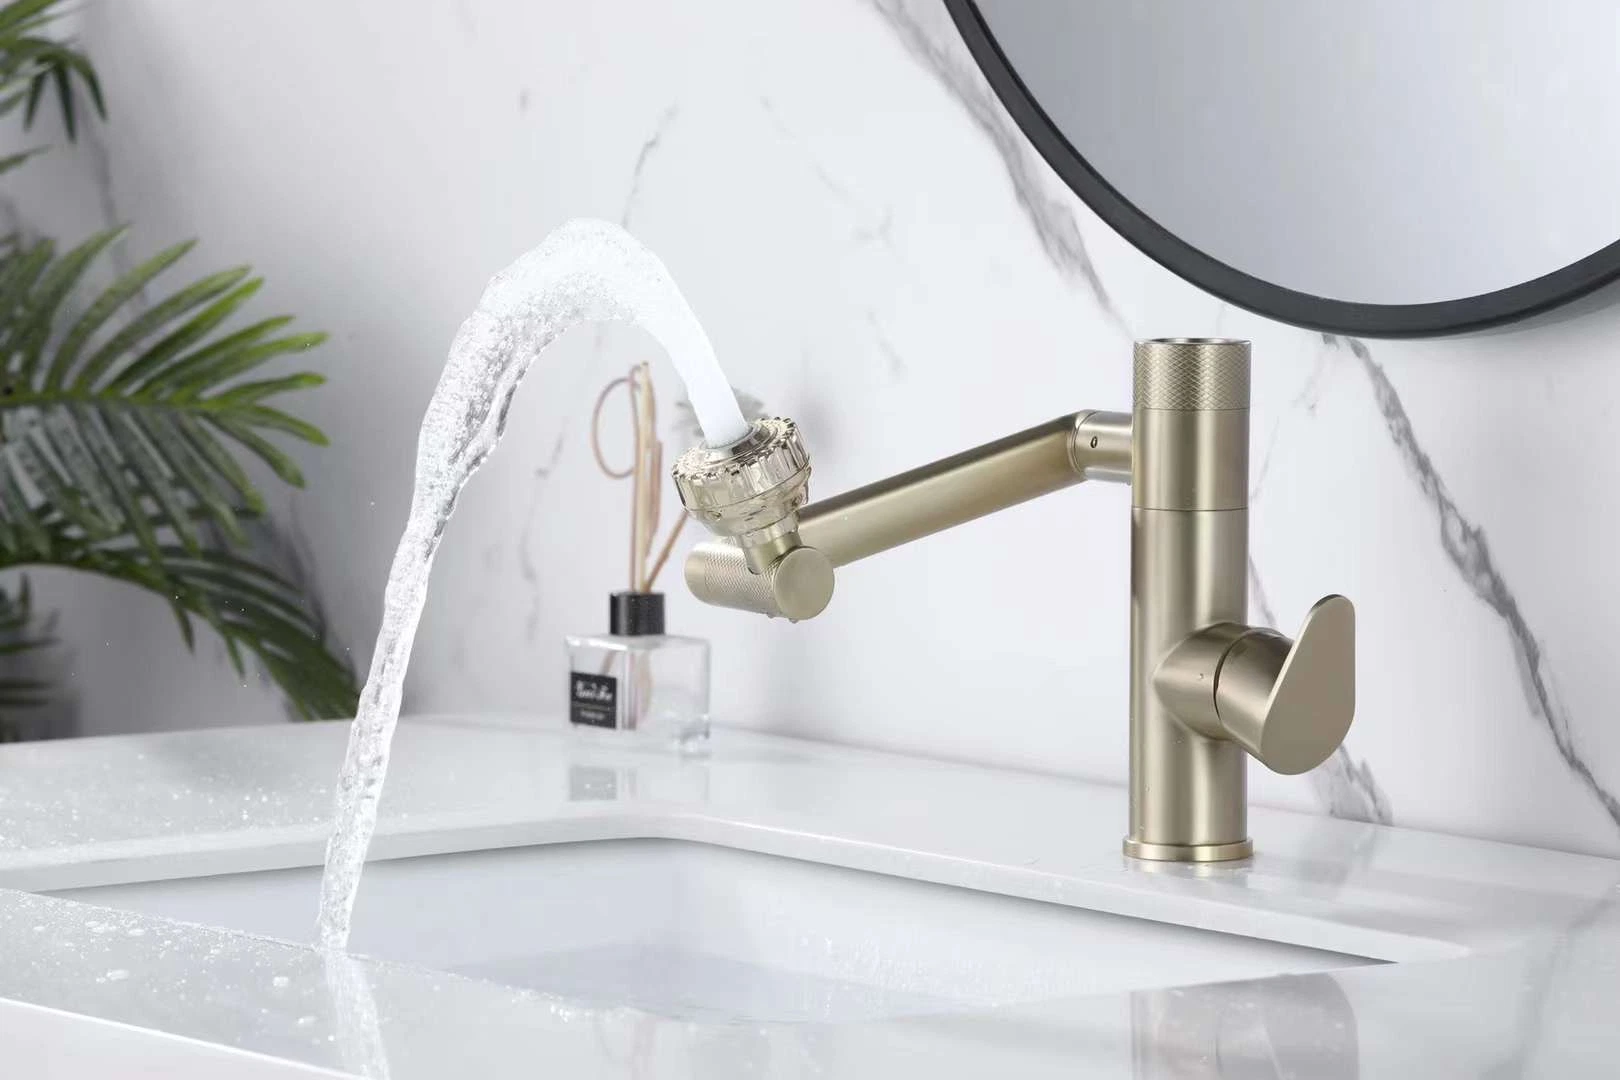 Solid Stainless Steel 304 Body Brushed Nickel Gold Digital Display All in One Bathroom Sink Taps Faucet Mixer